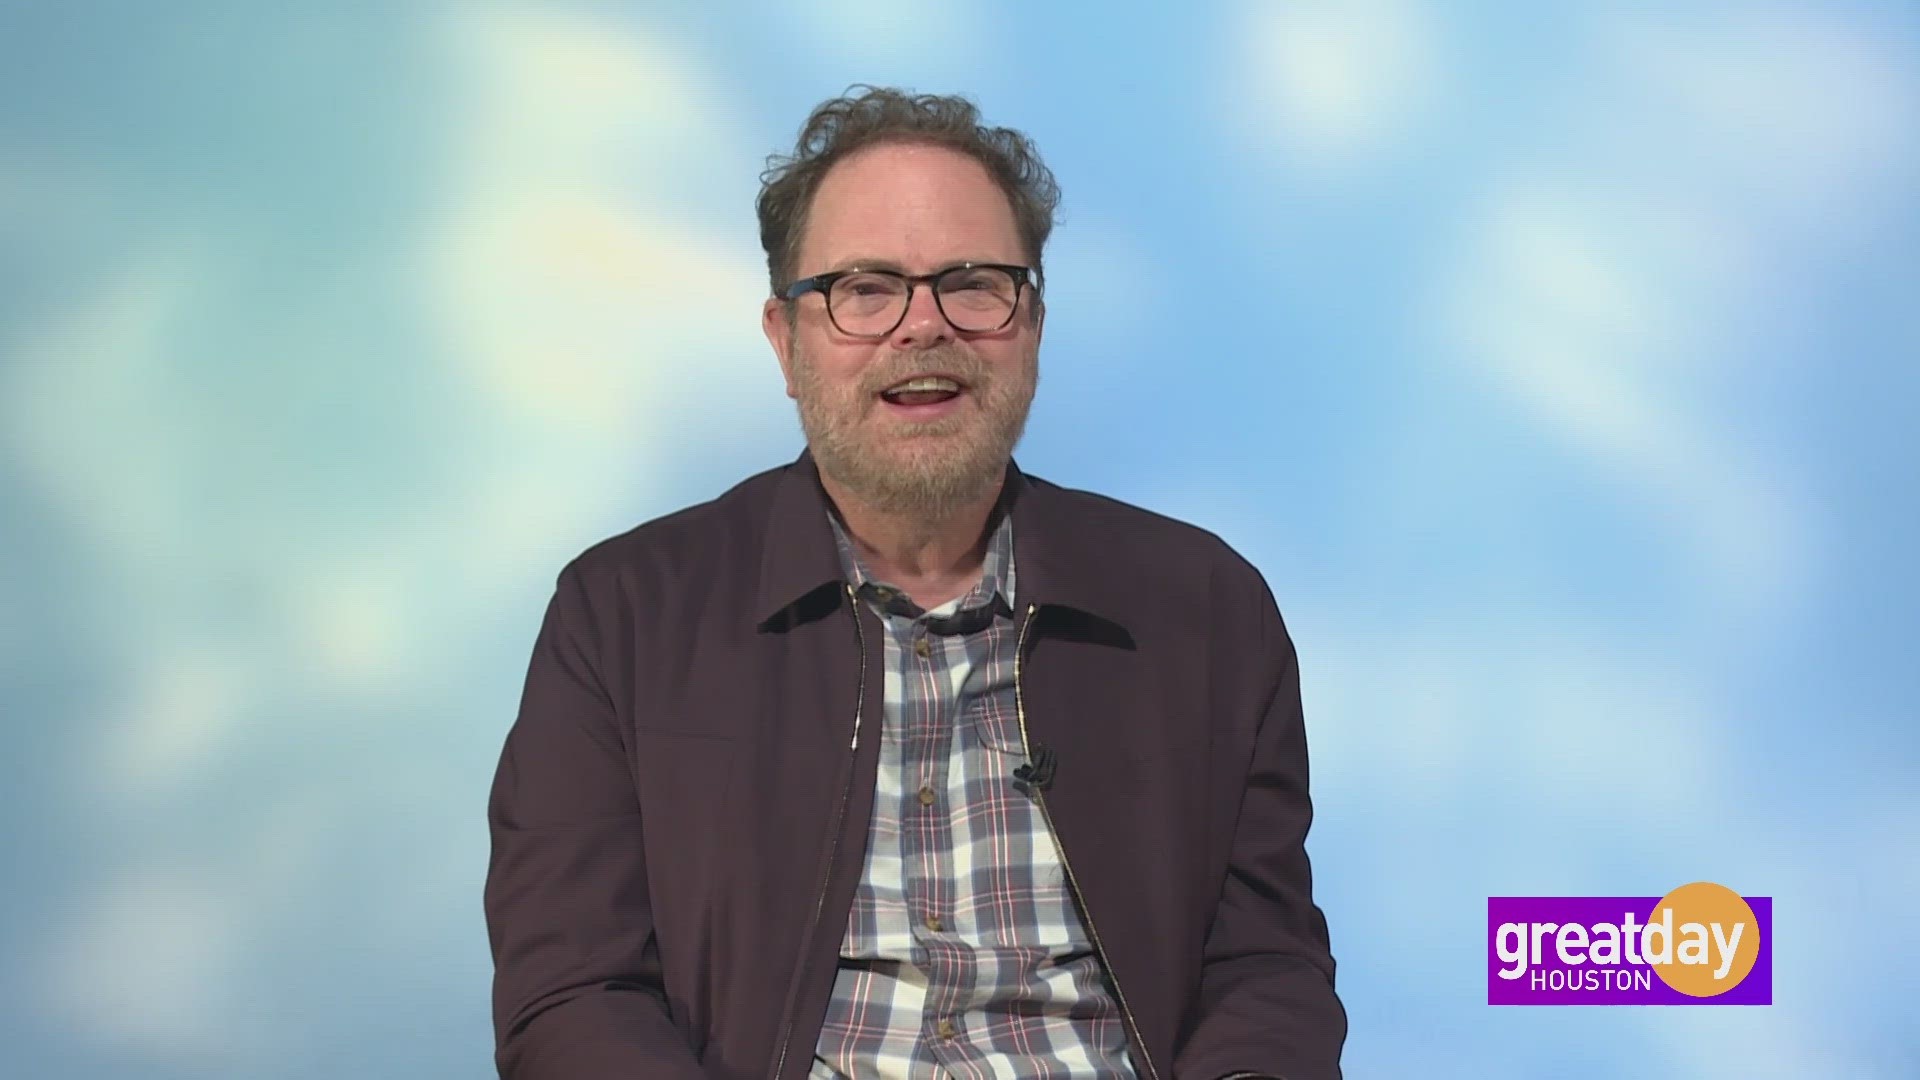 3x Emmy-Nominated Actor Rainn Wilson discusses his life, career and global journey to find happiness.